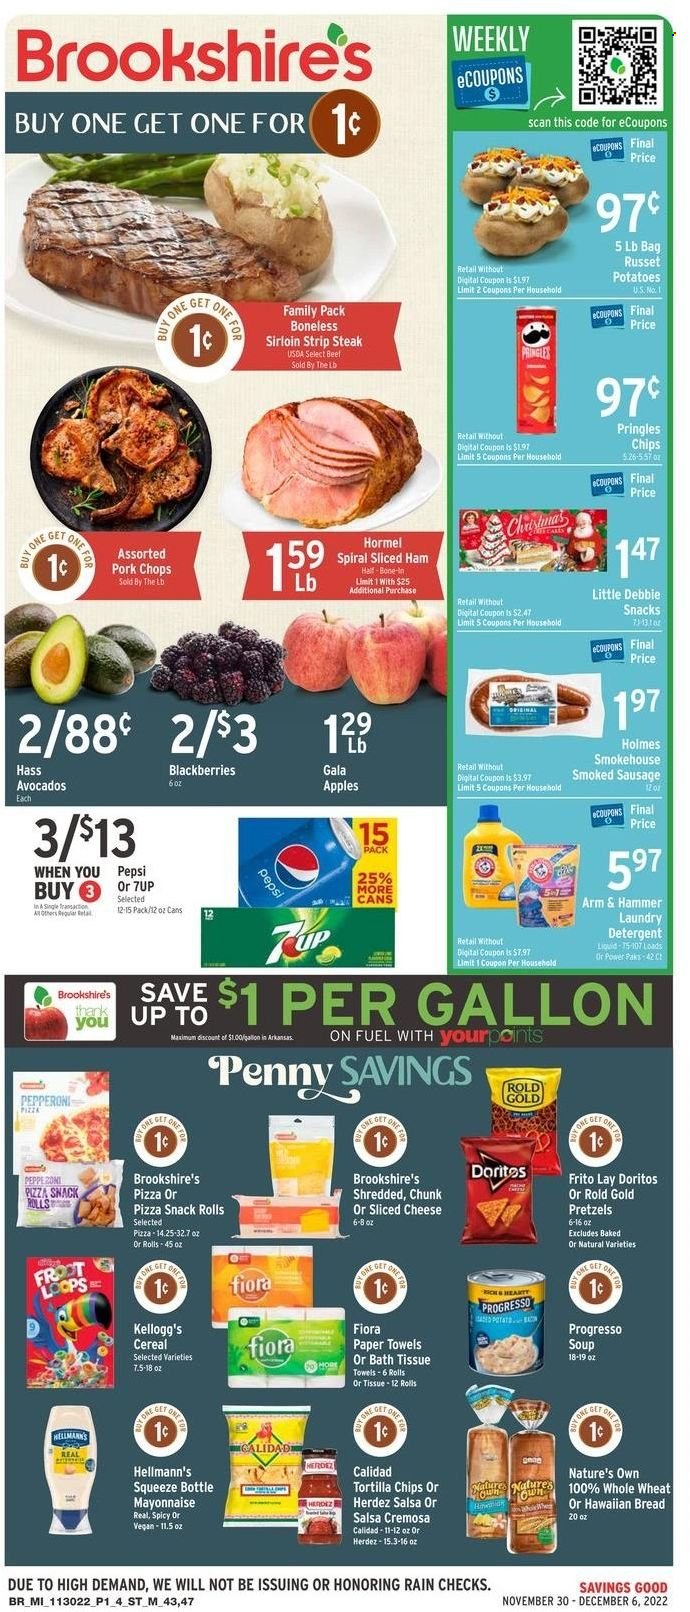 thumbnail - Brookshires Flyer - 11/30/2022 - 12/06/2022 - Sales products - bread, pretzels, russet potatoes, potatoes, apples, avocado, blackberries, Gala, pizza, Progresso, Hormel, ham, sausage, smoked sausage, pepperoni, sliced cheese, mayonnaise, Hellmann’s, snack, Kellogg's, Doritos, tortilla chips, Pringles, chips, ARM & HAMMER, cereals, salsa, Pepsi, 7UP, beef meat, steak, striploin steak, pork chops, pork meat, bath tissue, kitchen towels, paper towels, detergent, laundry detergent, Nature's Own. Page 1.